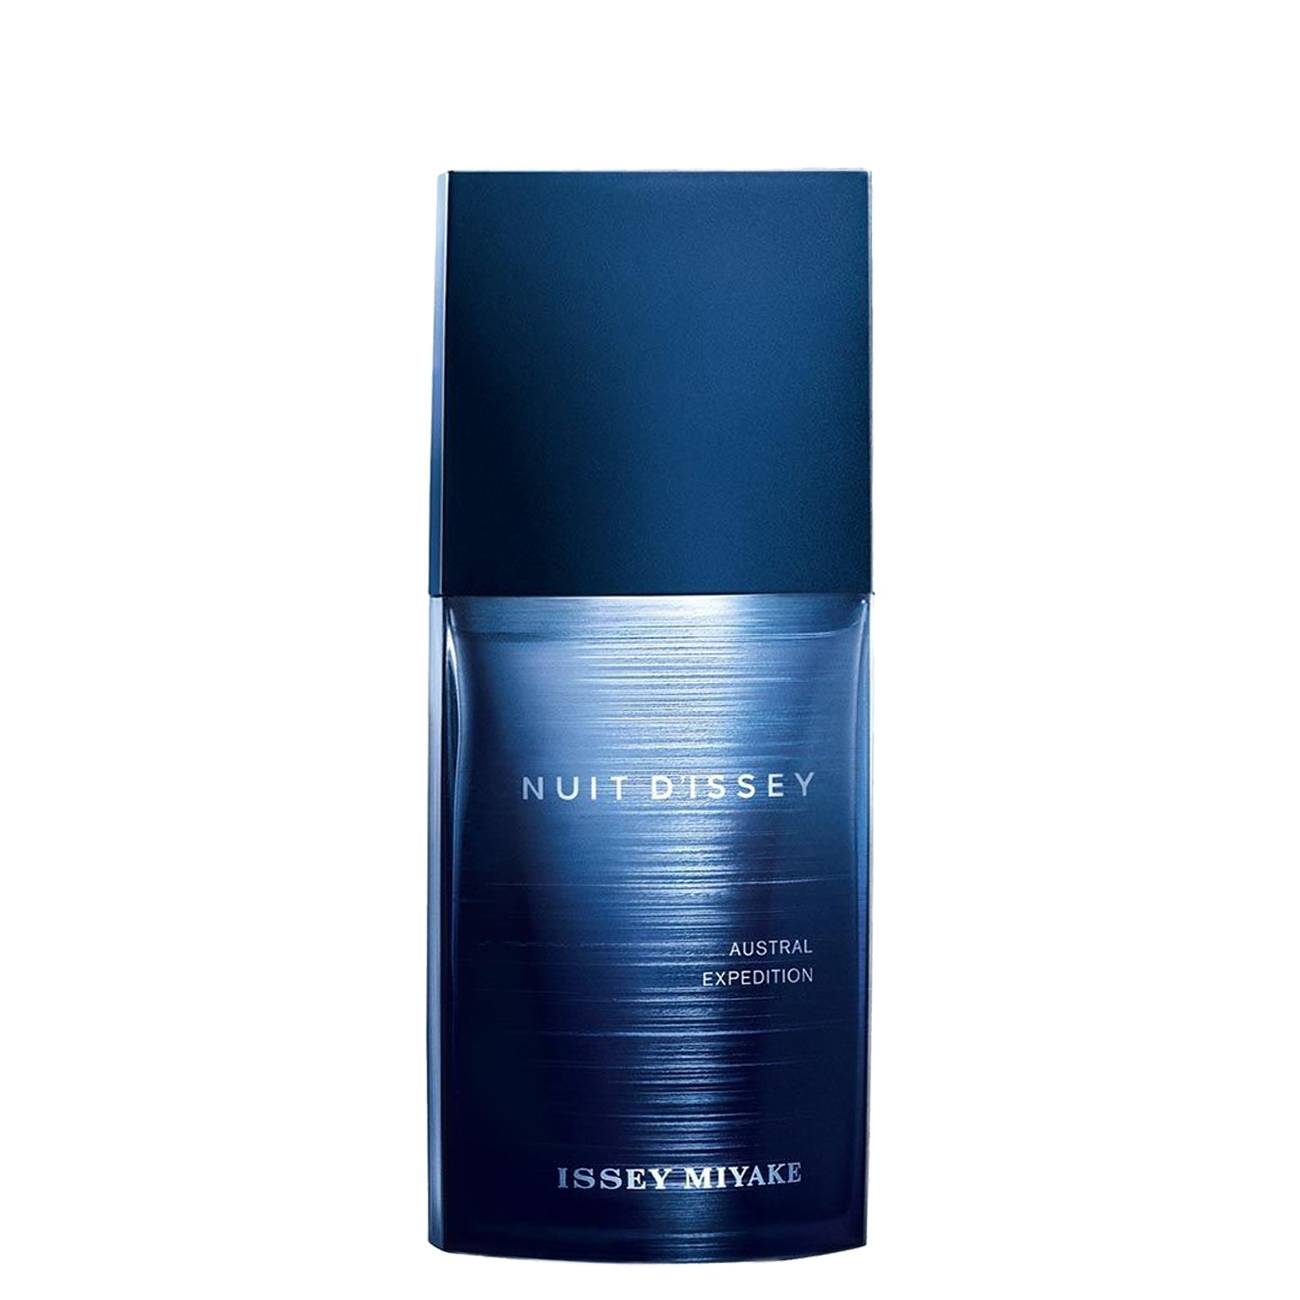 NUIT D’ISSEY AUSTRAL EXPEDITION 125 ml Issey Miyake bestvalue.eu imagine noua 2022